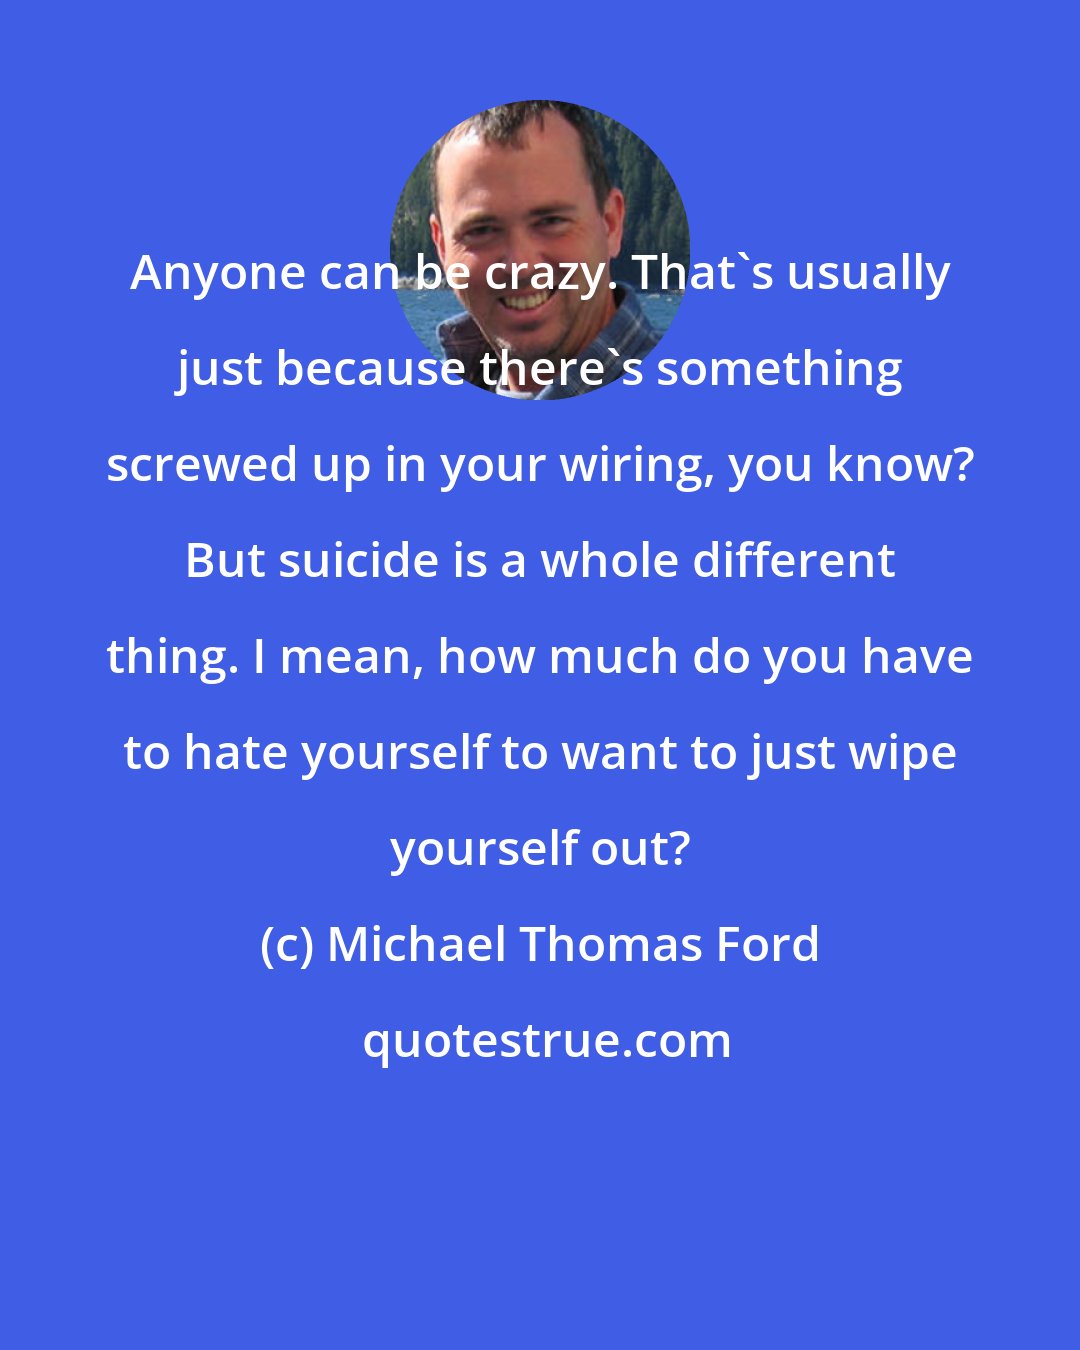 Michael Thomas Ford: Anyone can be crazy. That's usually just because there's something screwed up in your wiring, you know? But suicide is a whole different thing. I mean, how much do you have to hate yourself to want to just wipe yourself out?